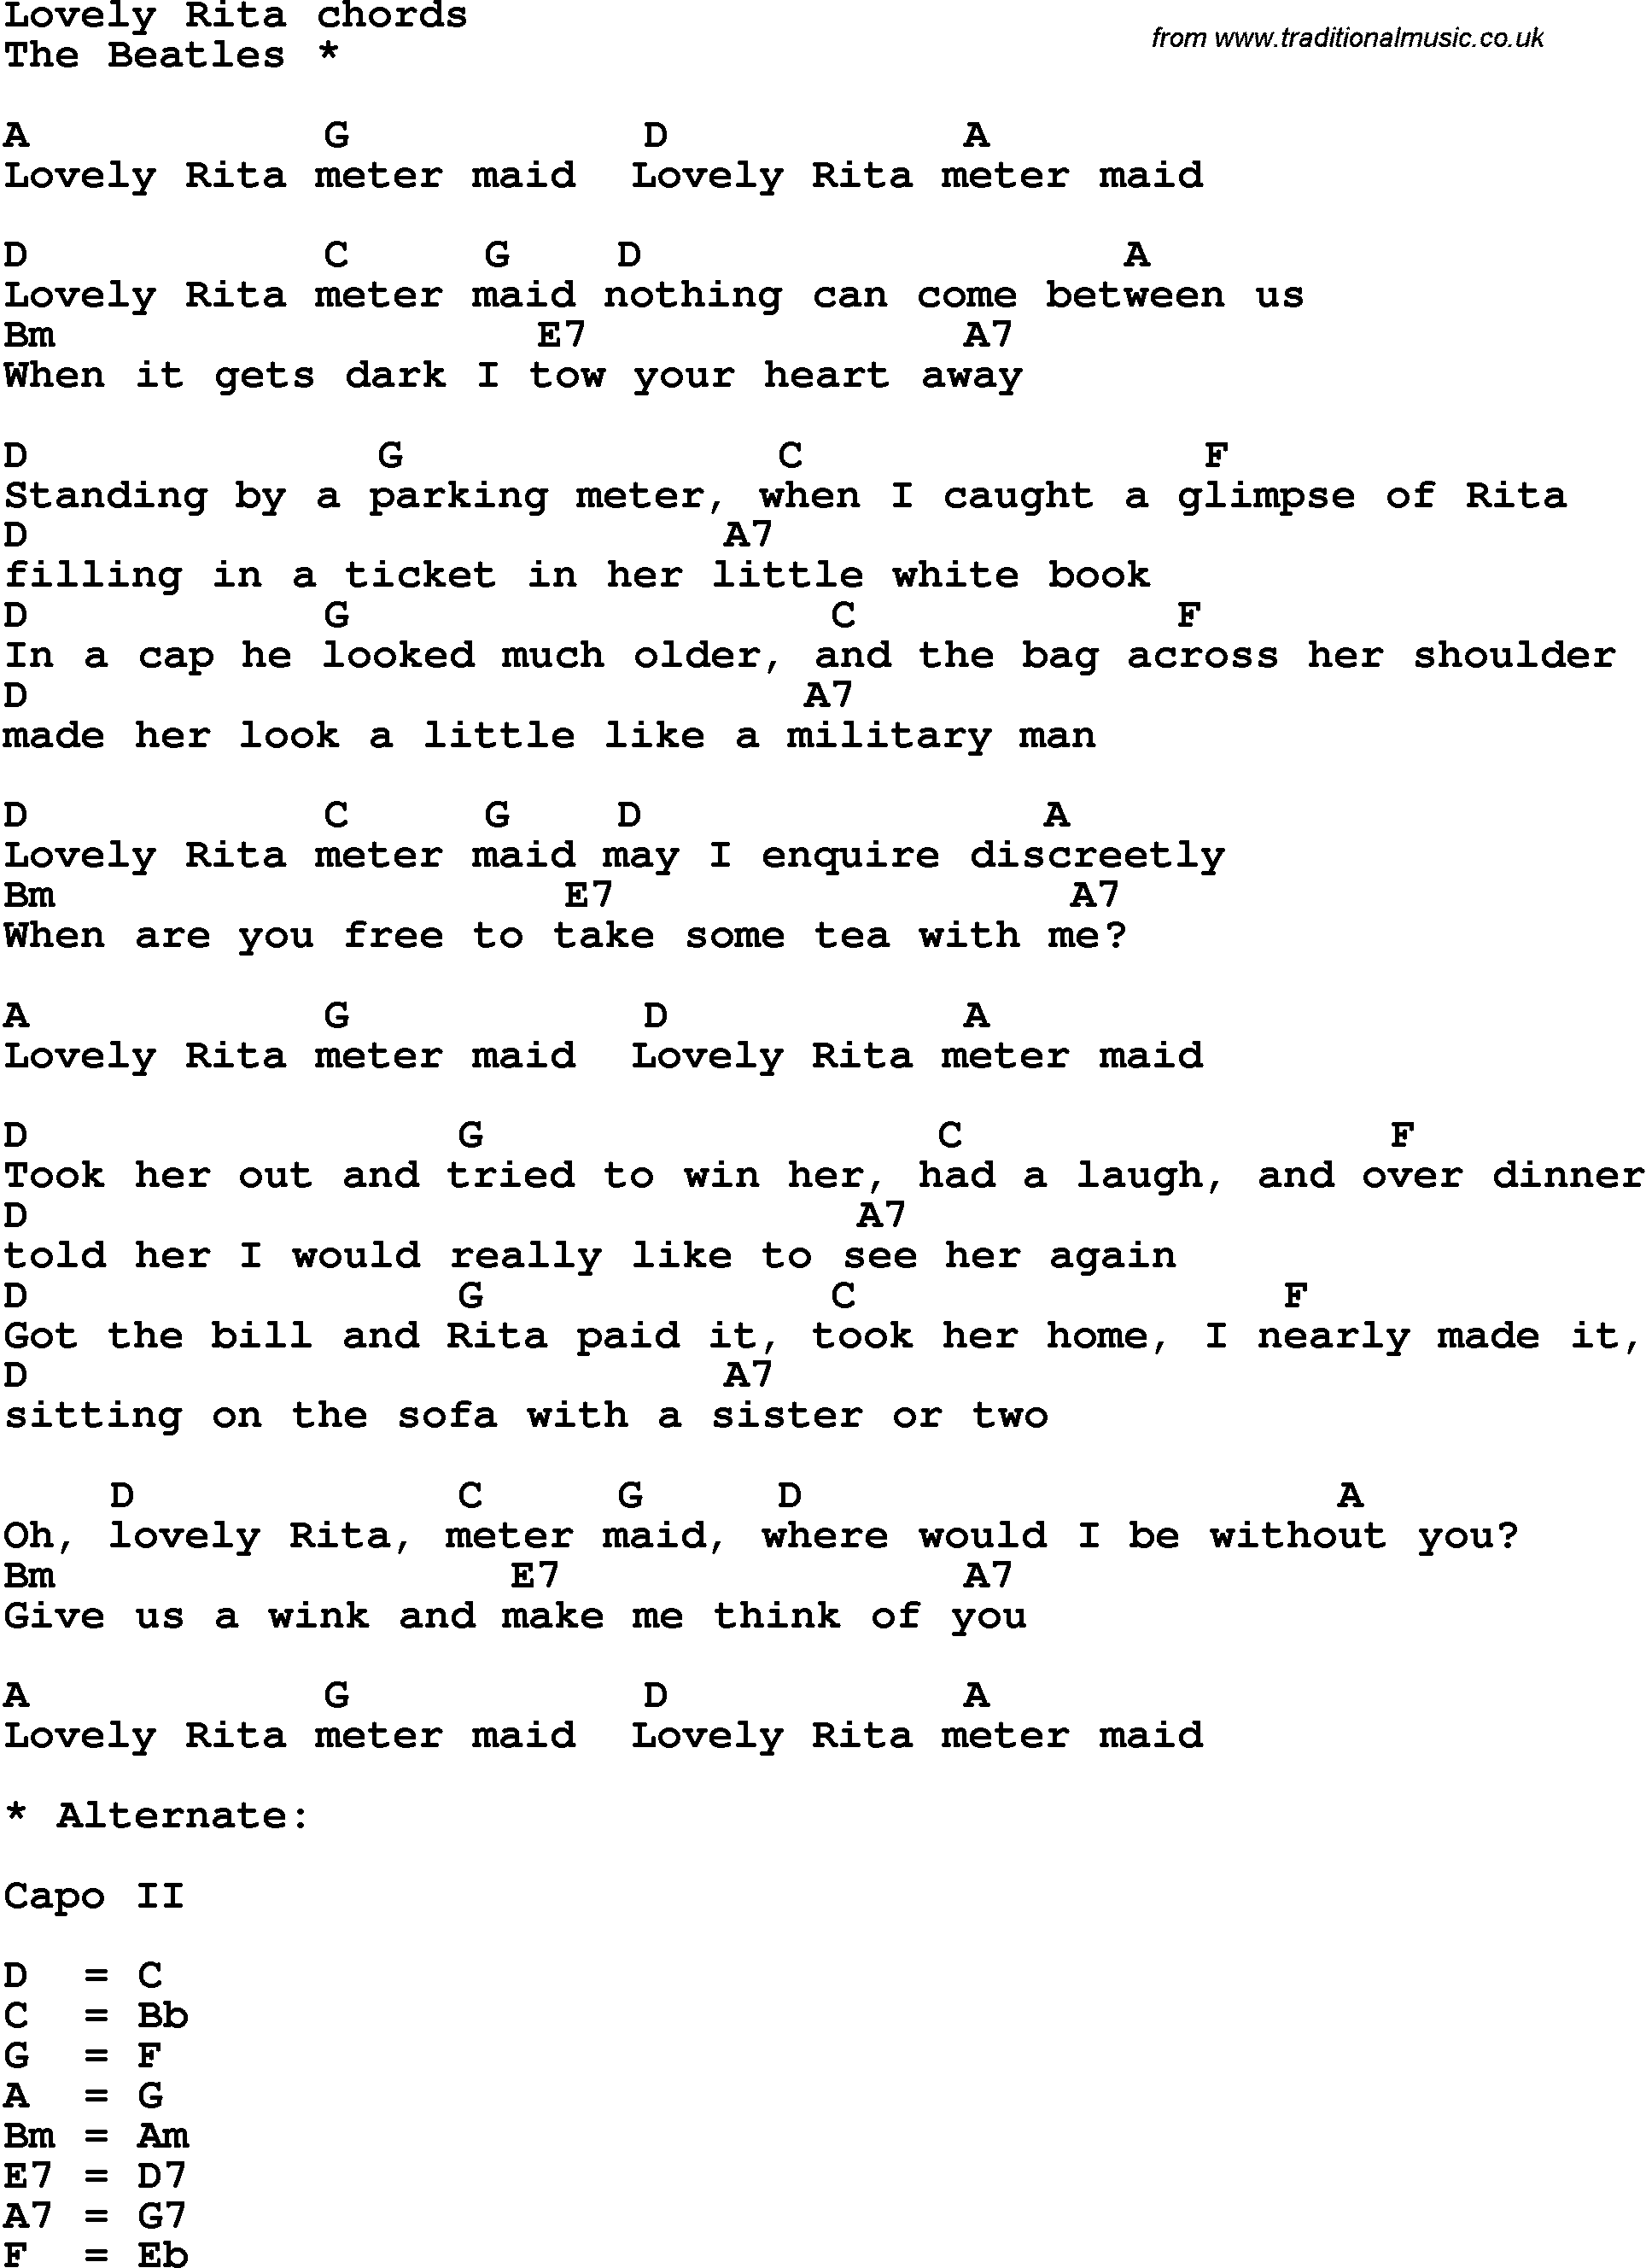 Song Lyrics with guitar chords for Lovely Rita - The Beatles